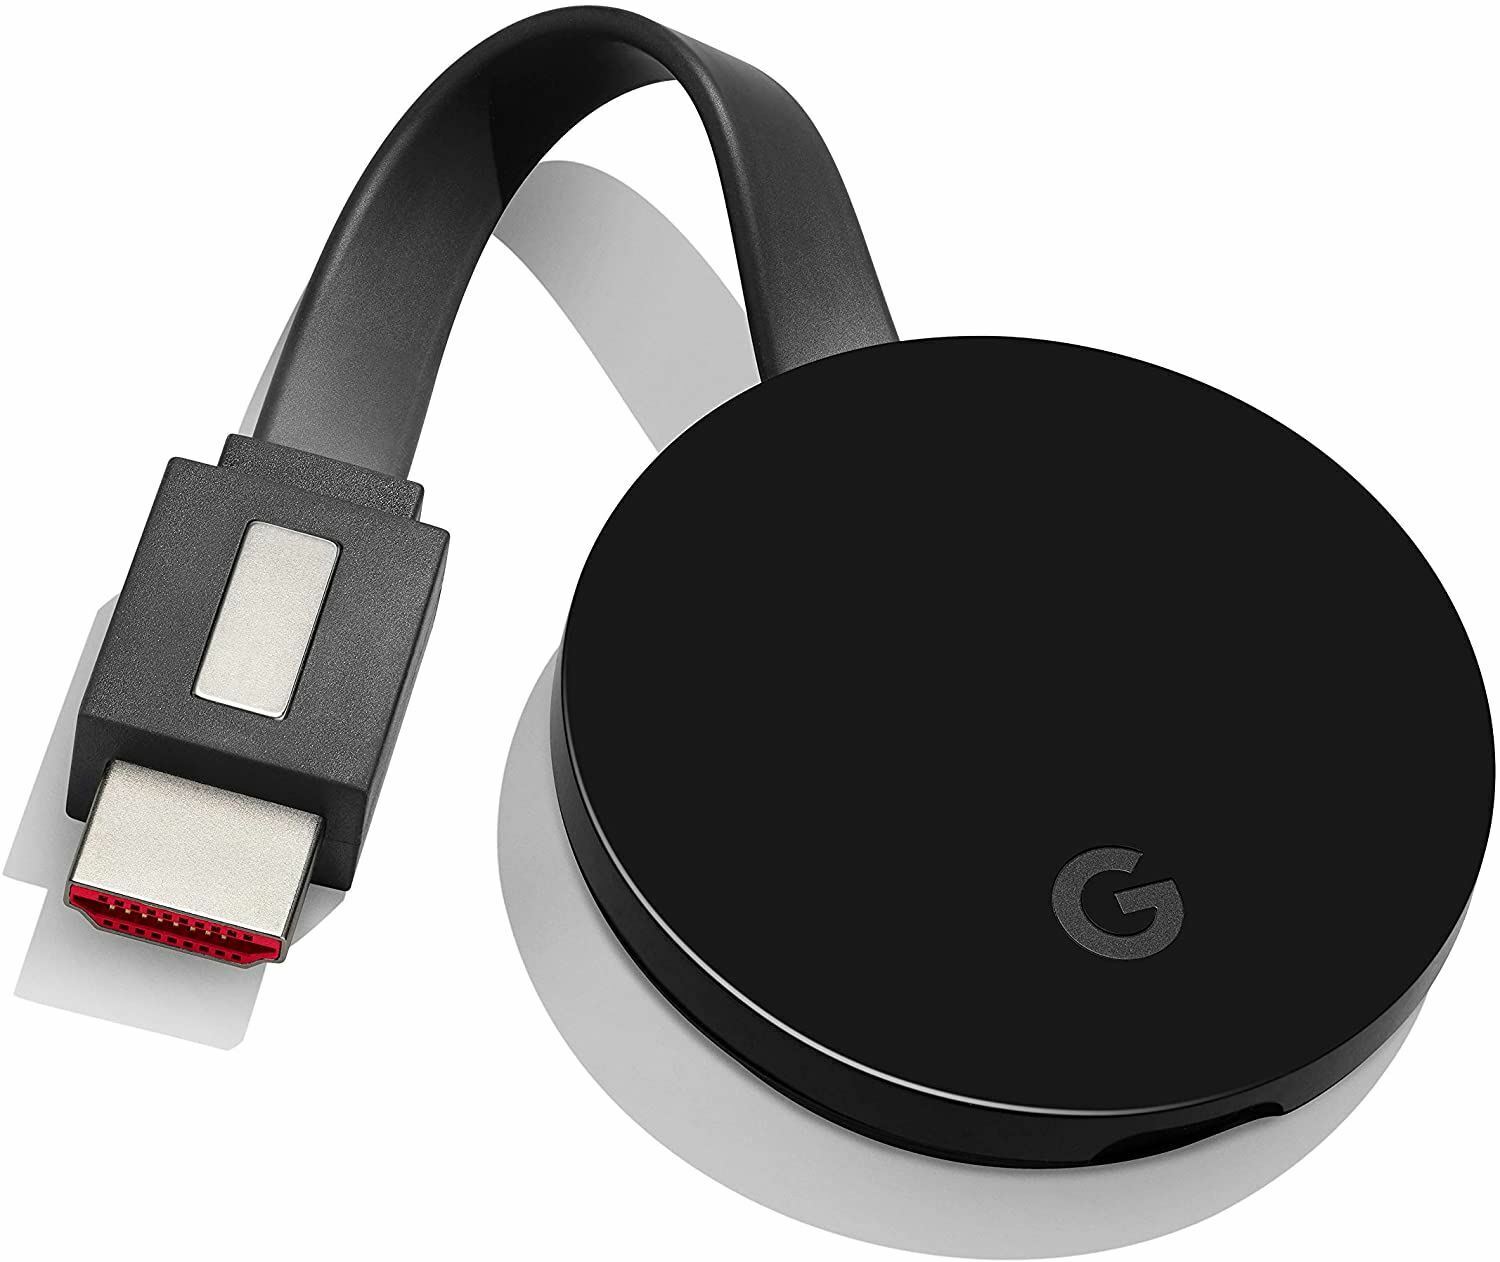 Quick And Easy Steps To Reset Your Chromecast Dongle